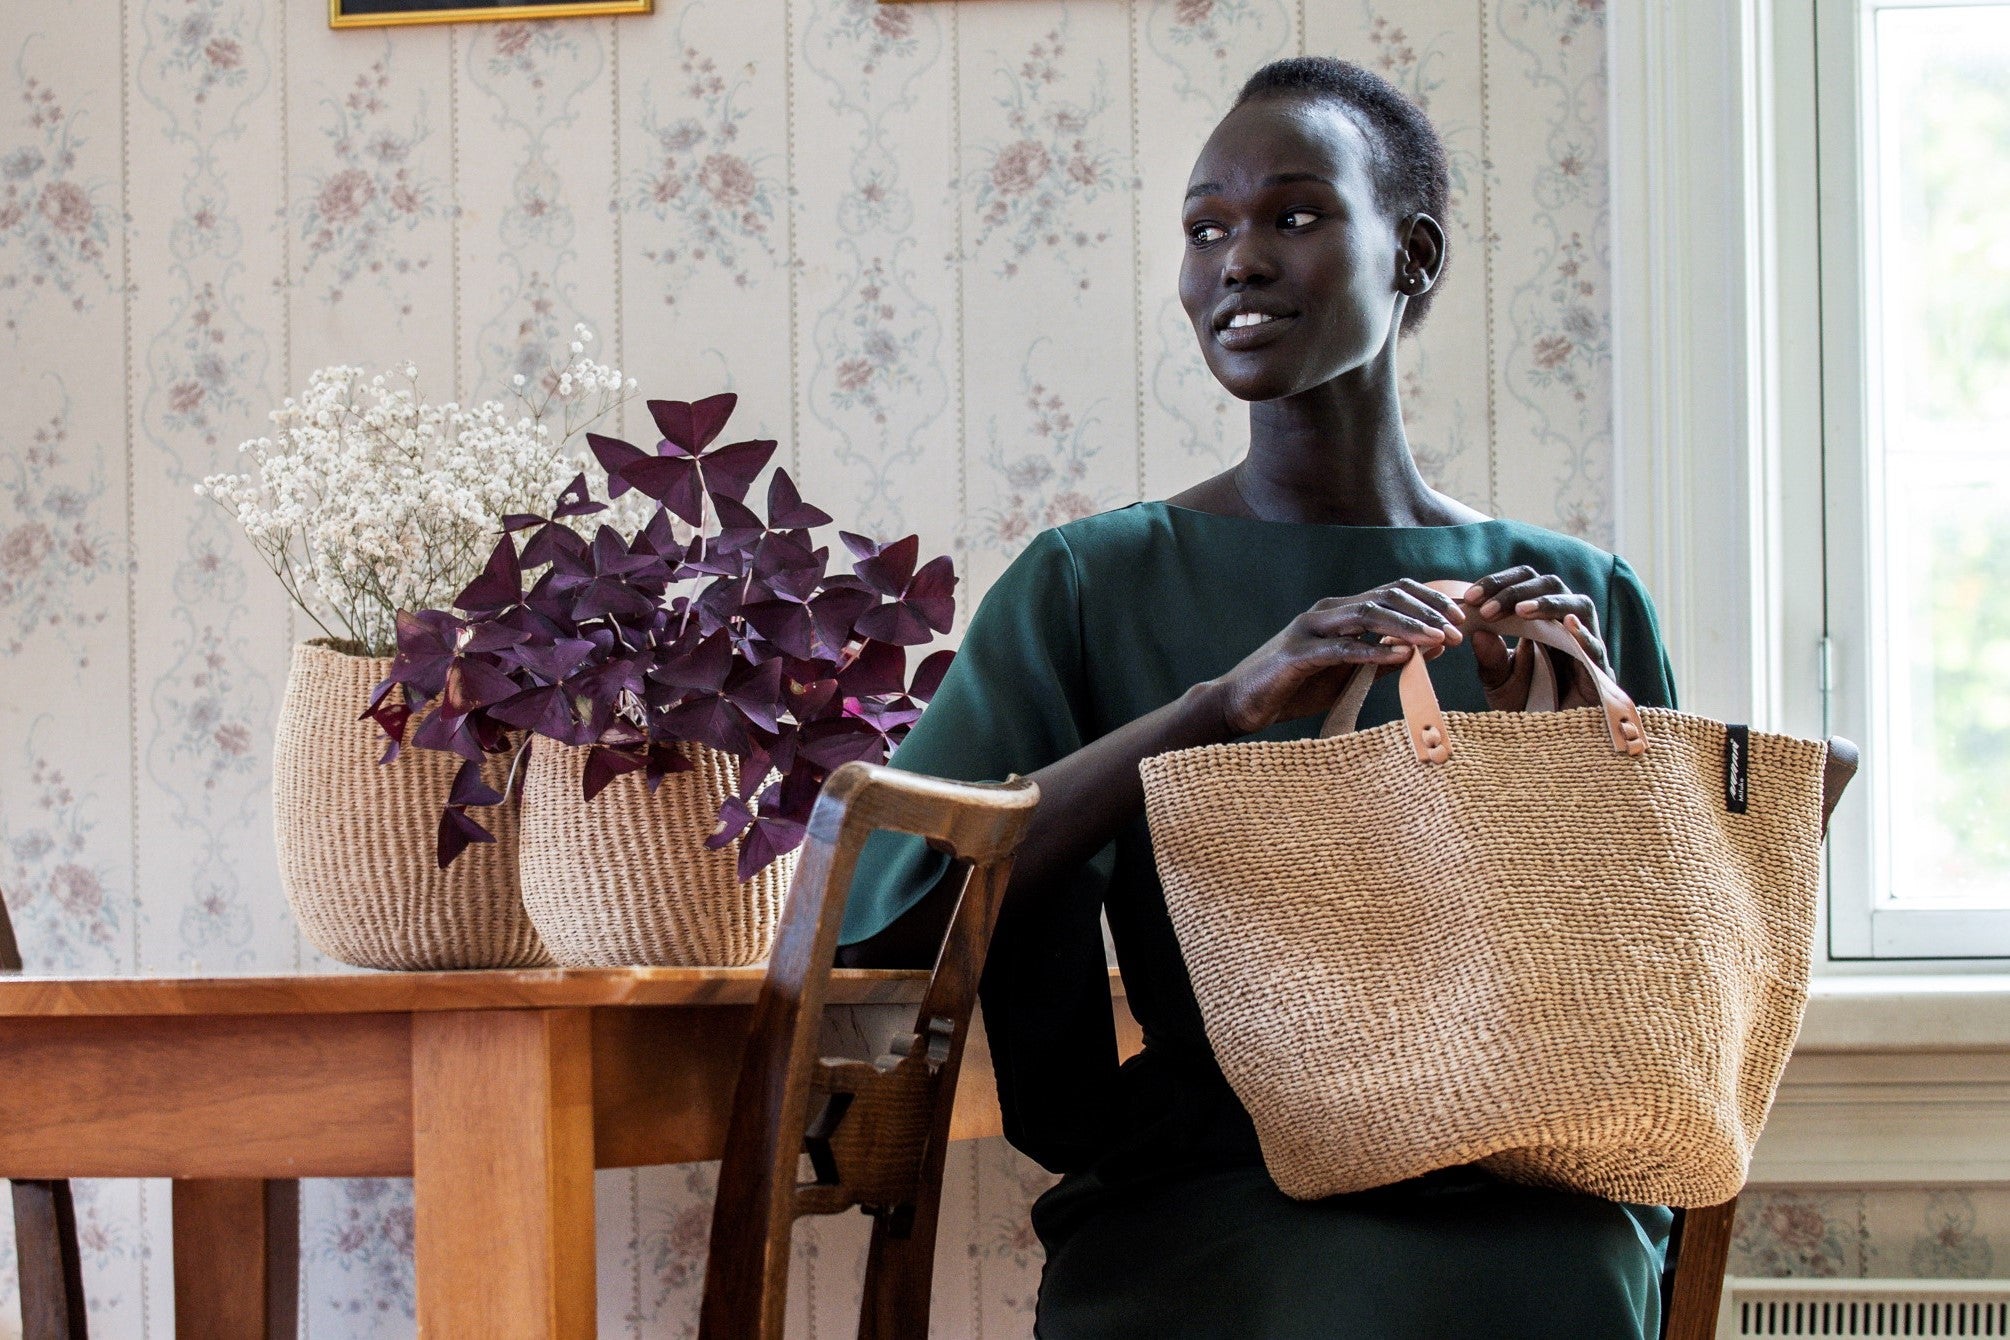 STORE AND CARRY TO GO AND BRING HOME - MIFUKO'S MARKET BASKETS